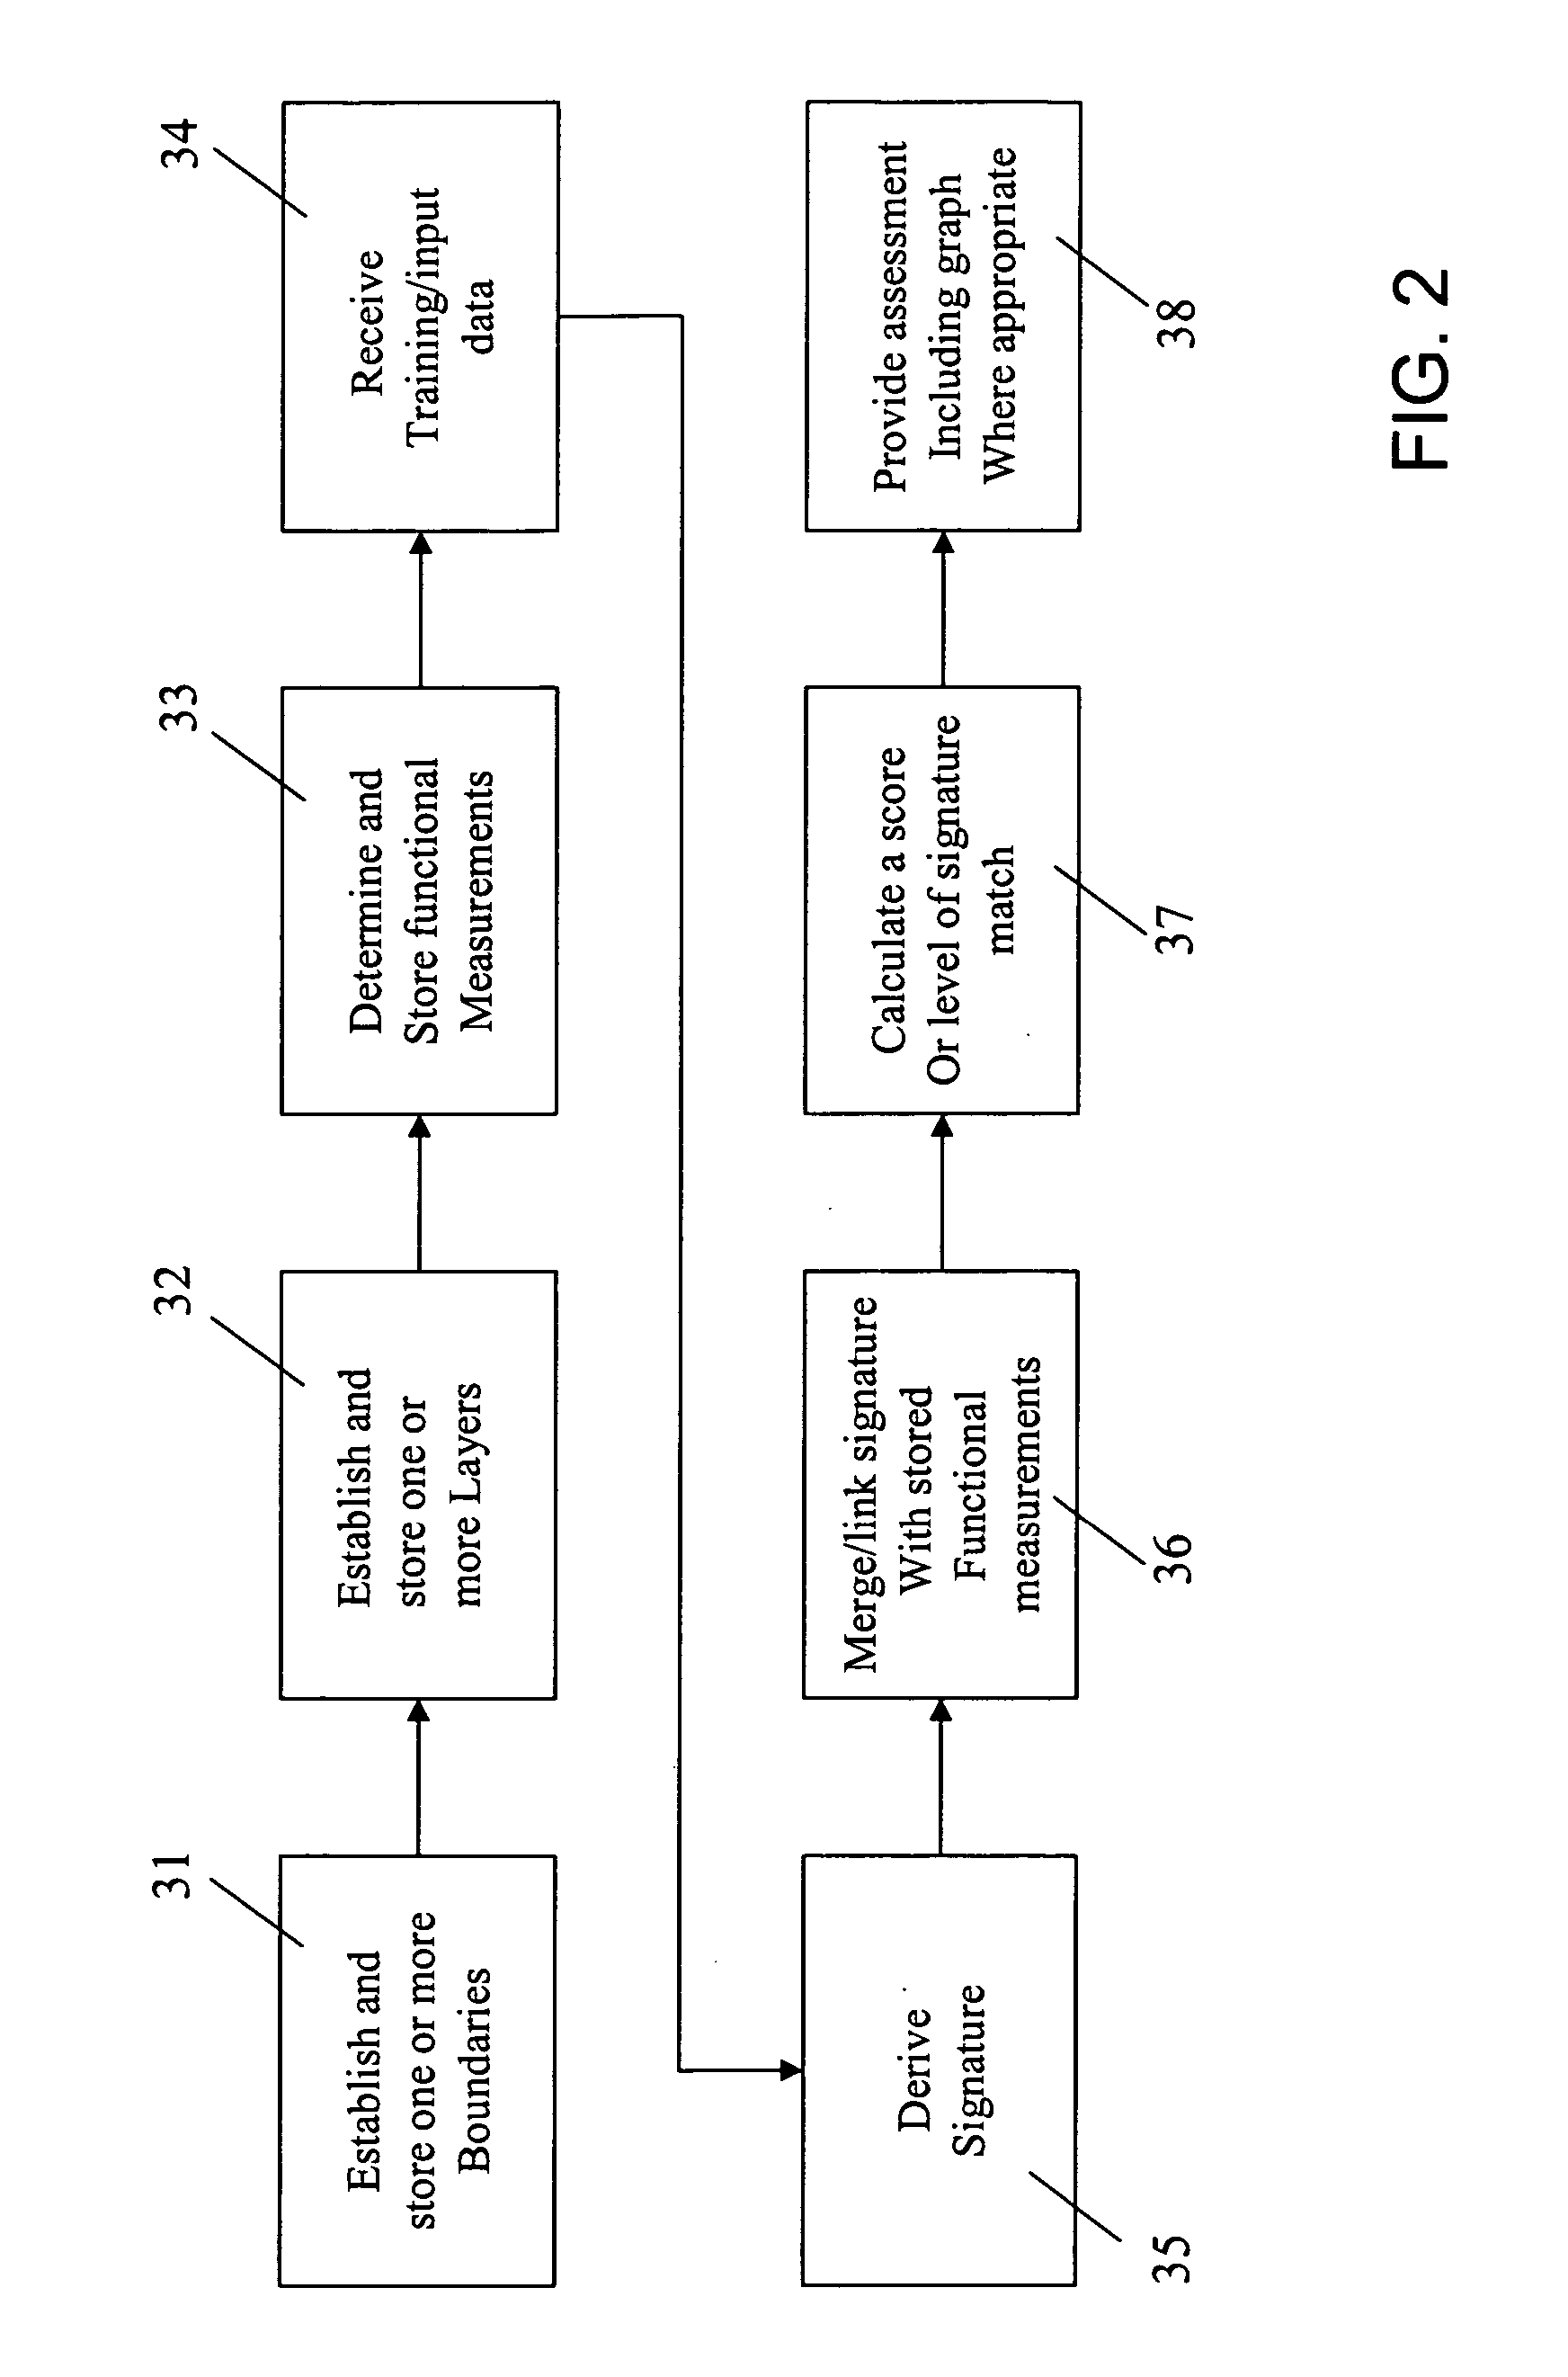 Method and system for forecasting events and results based on geospatial modeling